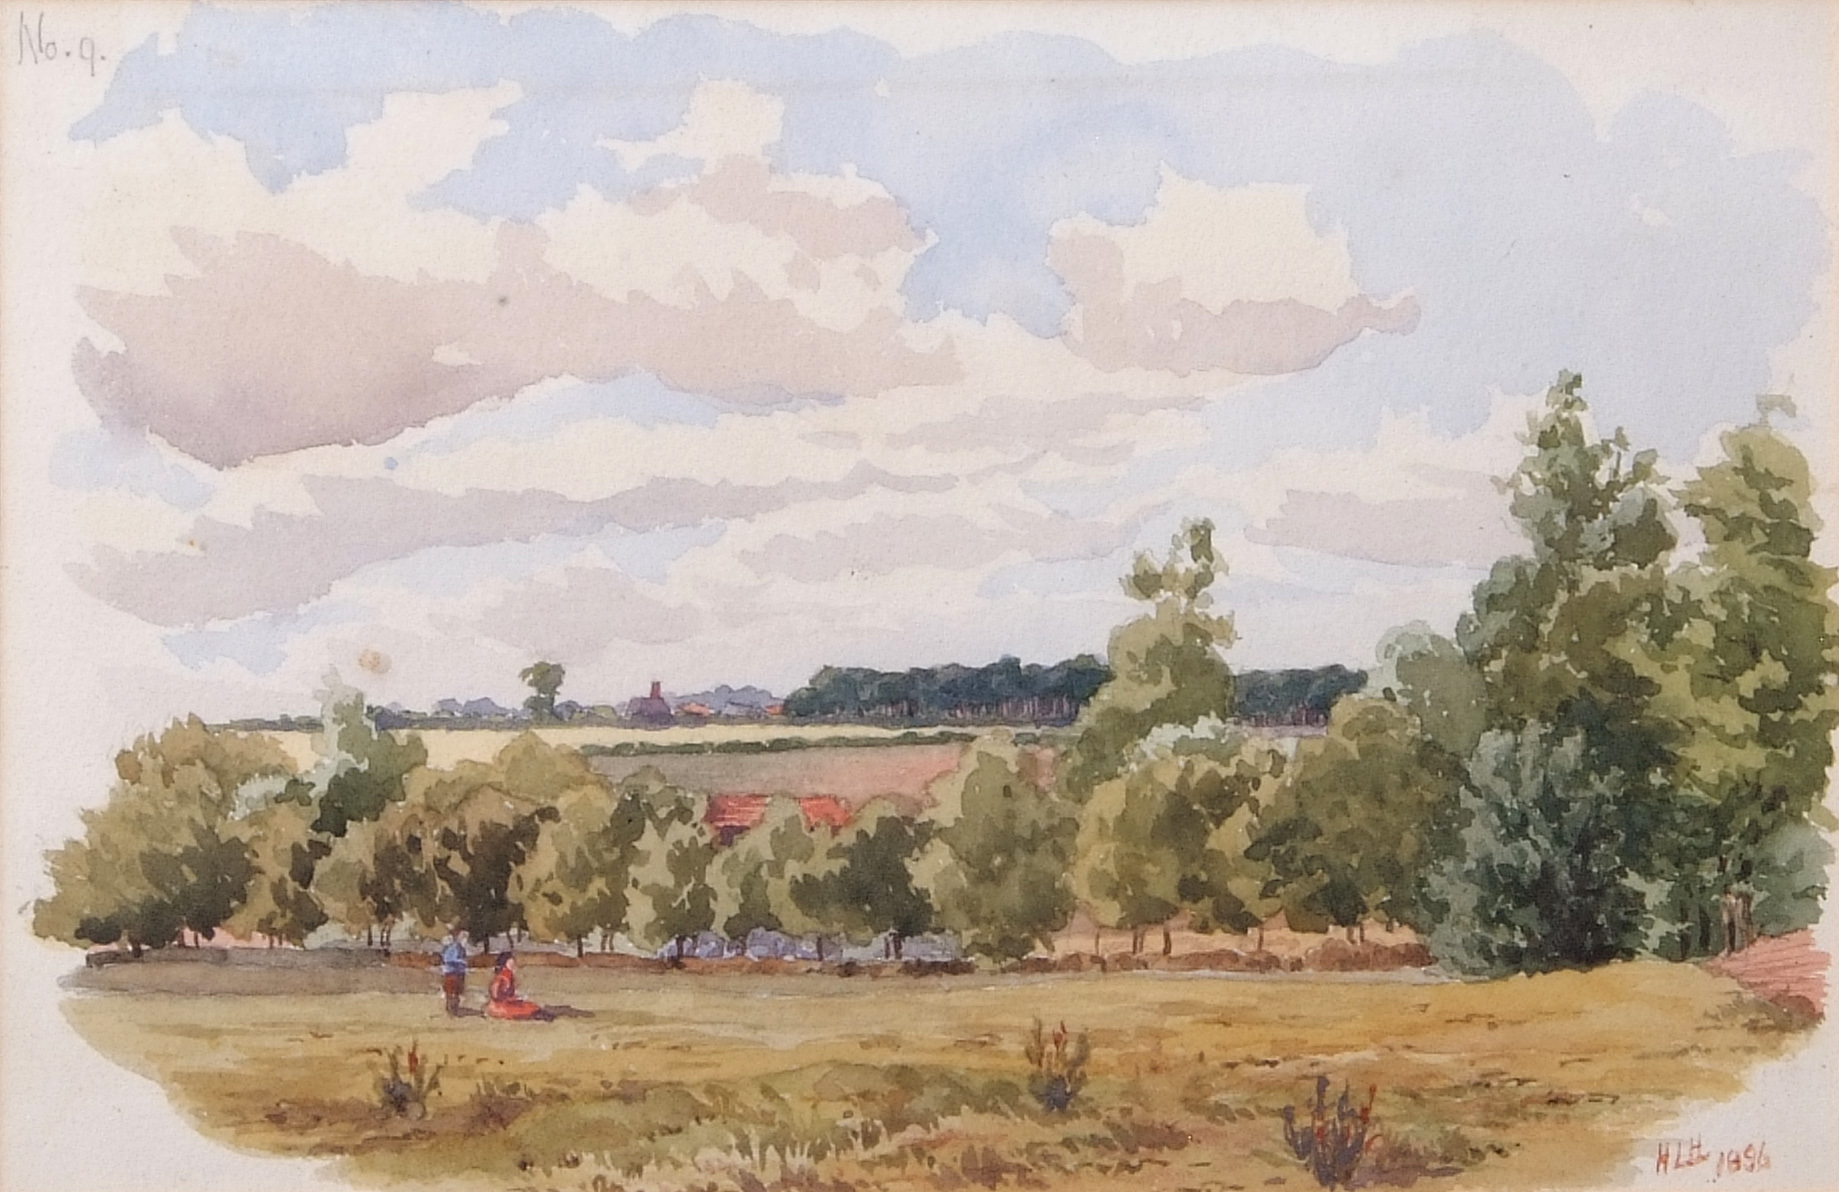 Henry Leslie Harris (ex 1880-1910), Landscape with figures, watercolour, initialled and dated 1896